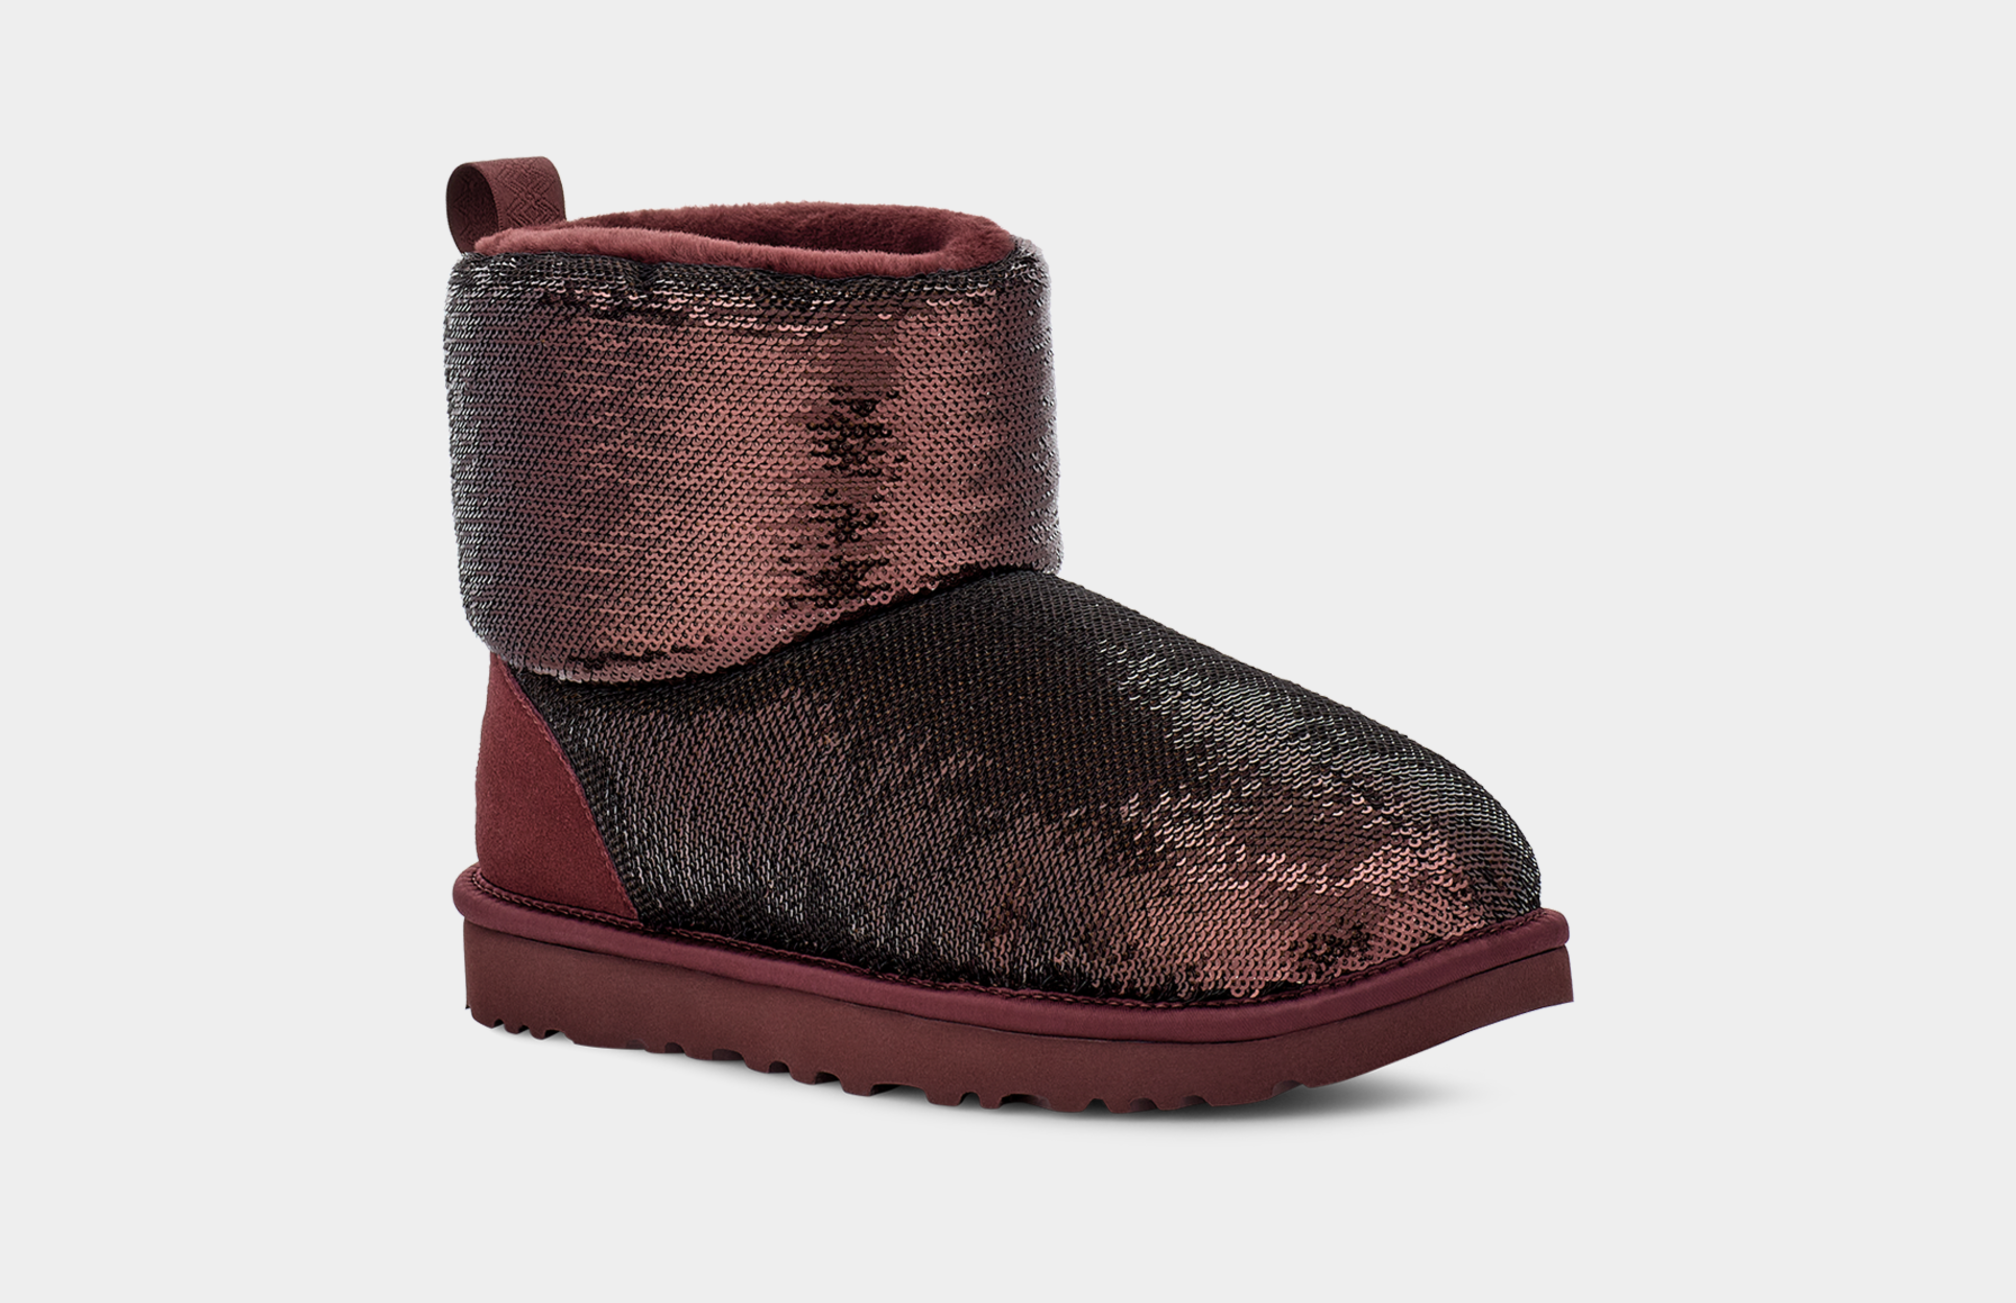 Women's Sequin Boots, UGG® Canada, Boots Collection, Boots for Women